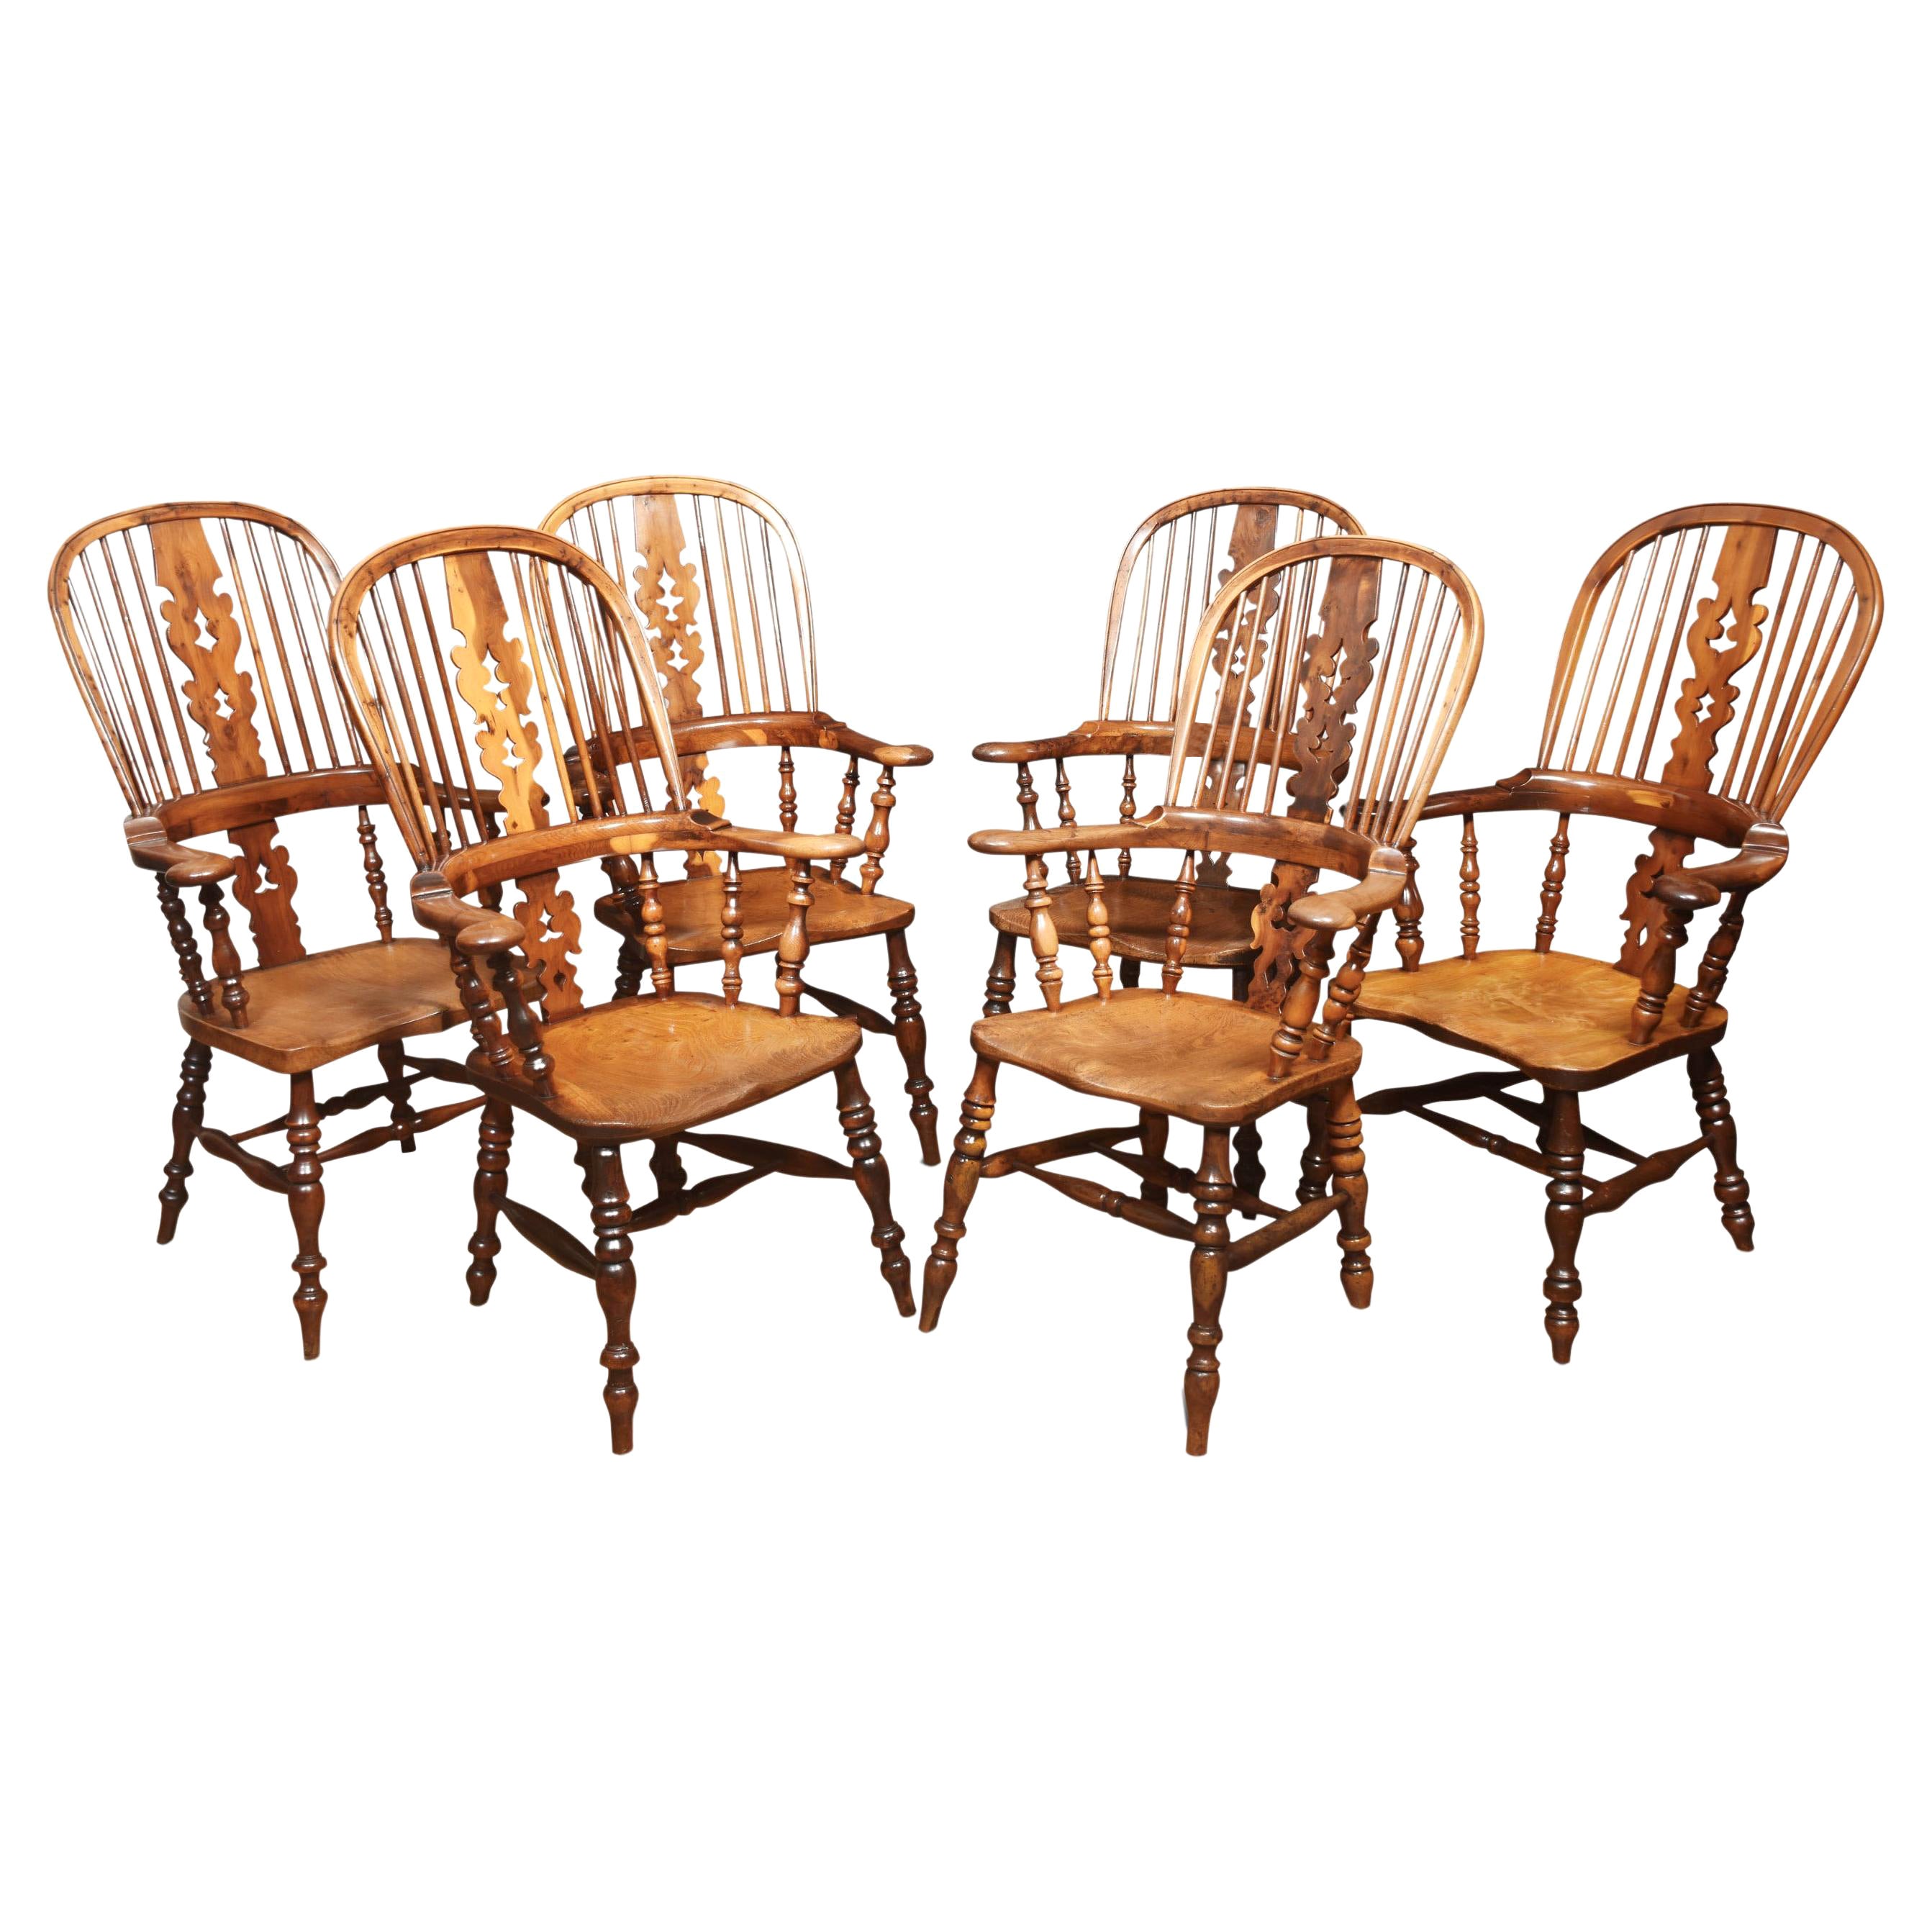 Matched Set of Six 19th Century Yew Wood Windsor Armchairs